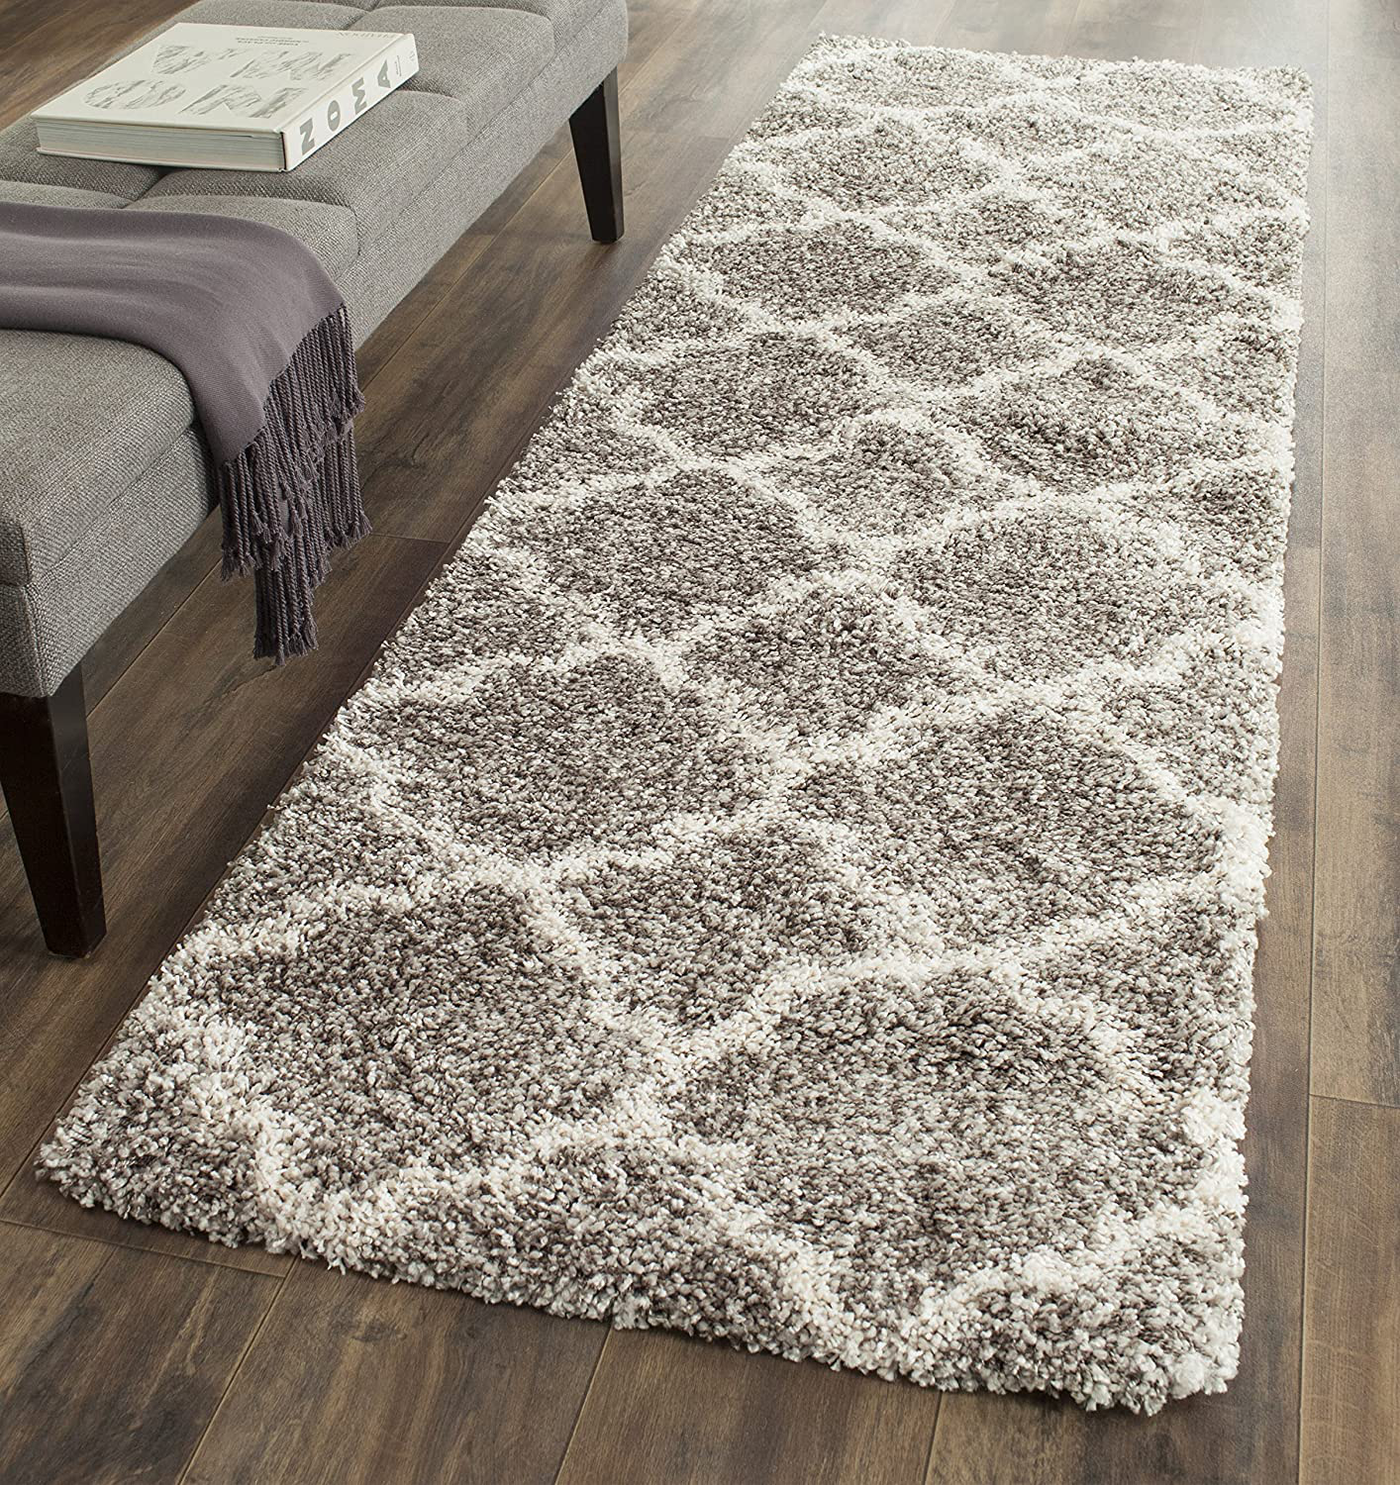 SAFAVIEH Hudson Shag Collection SGH282B Moroccan Trellis Non-Shedding Living Room Bedroom Dining Room Entryway Plush 2-inch Thick Runner, 2'3" x 12' , Grey / Ivory